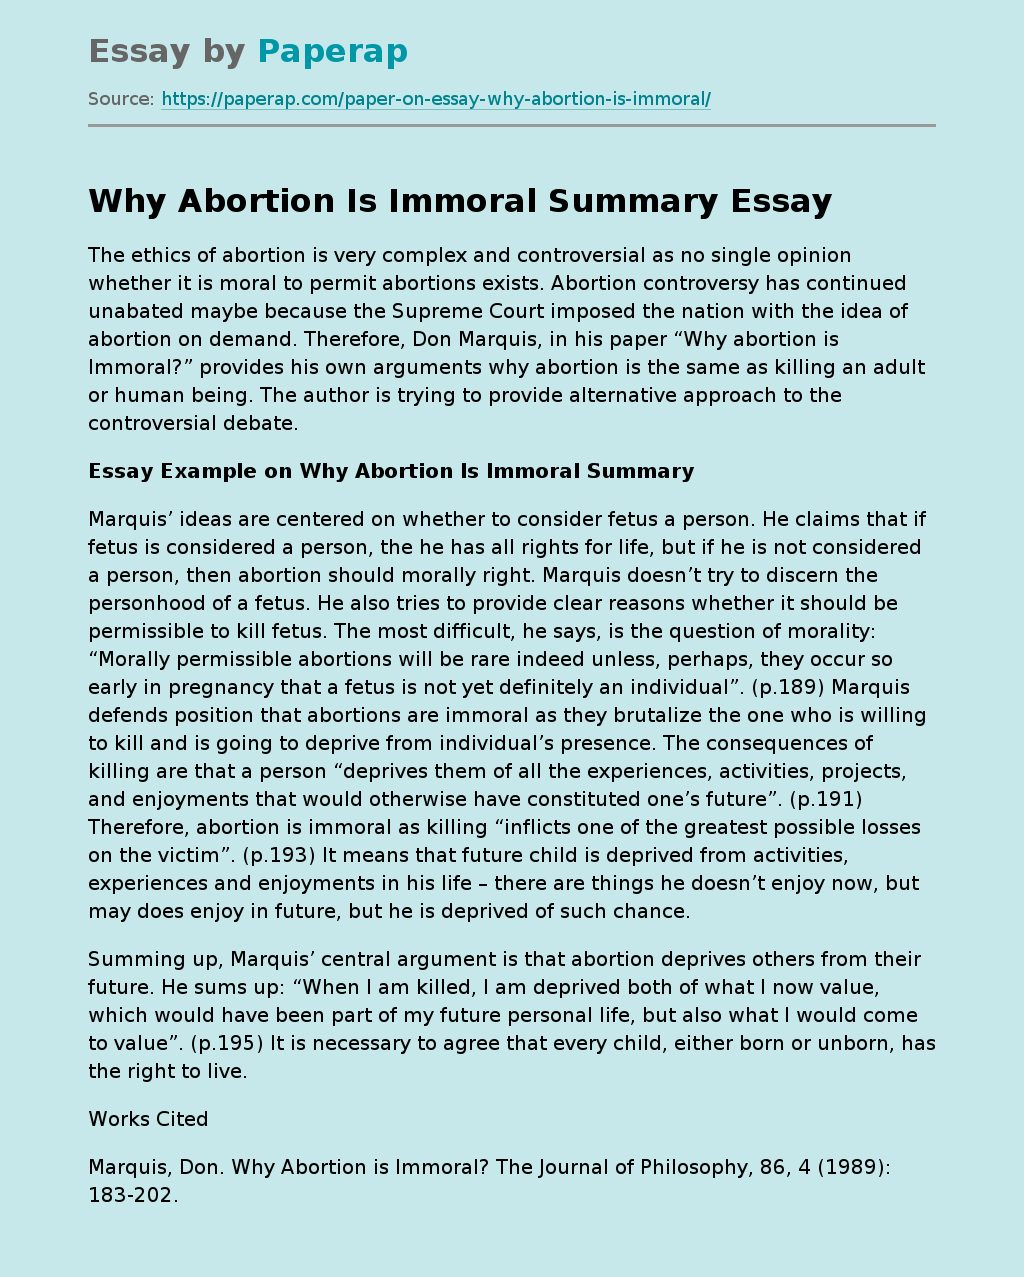 Why Abortion Is Immoral Summary